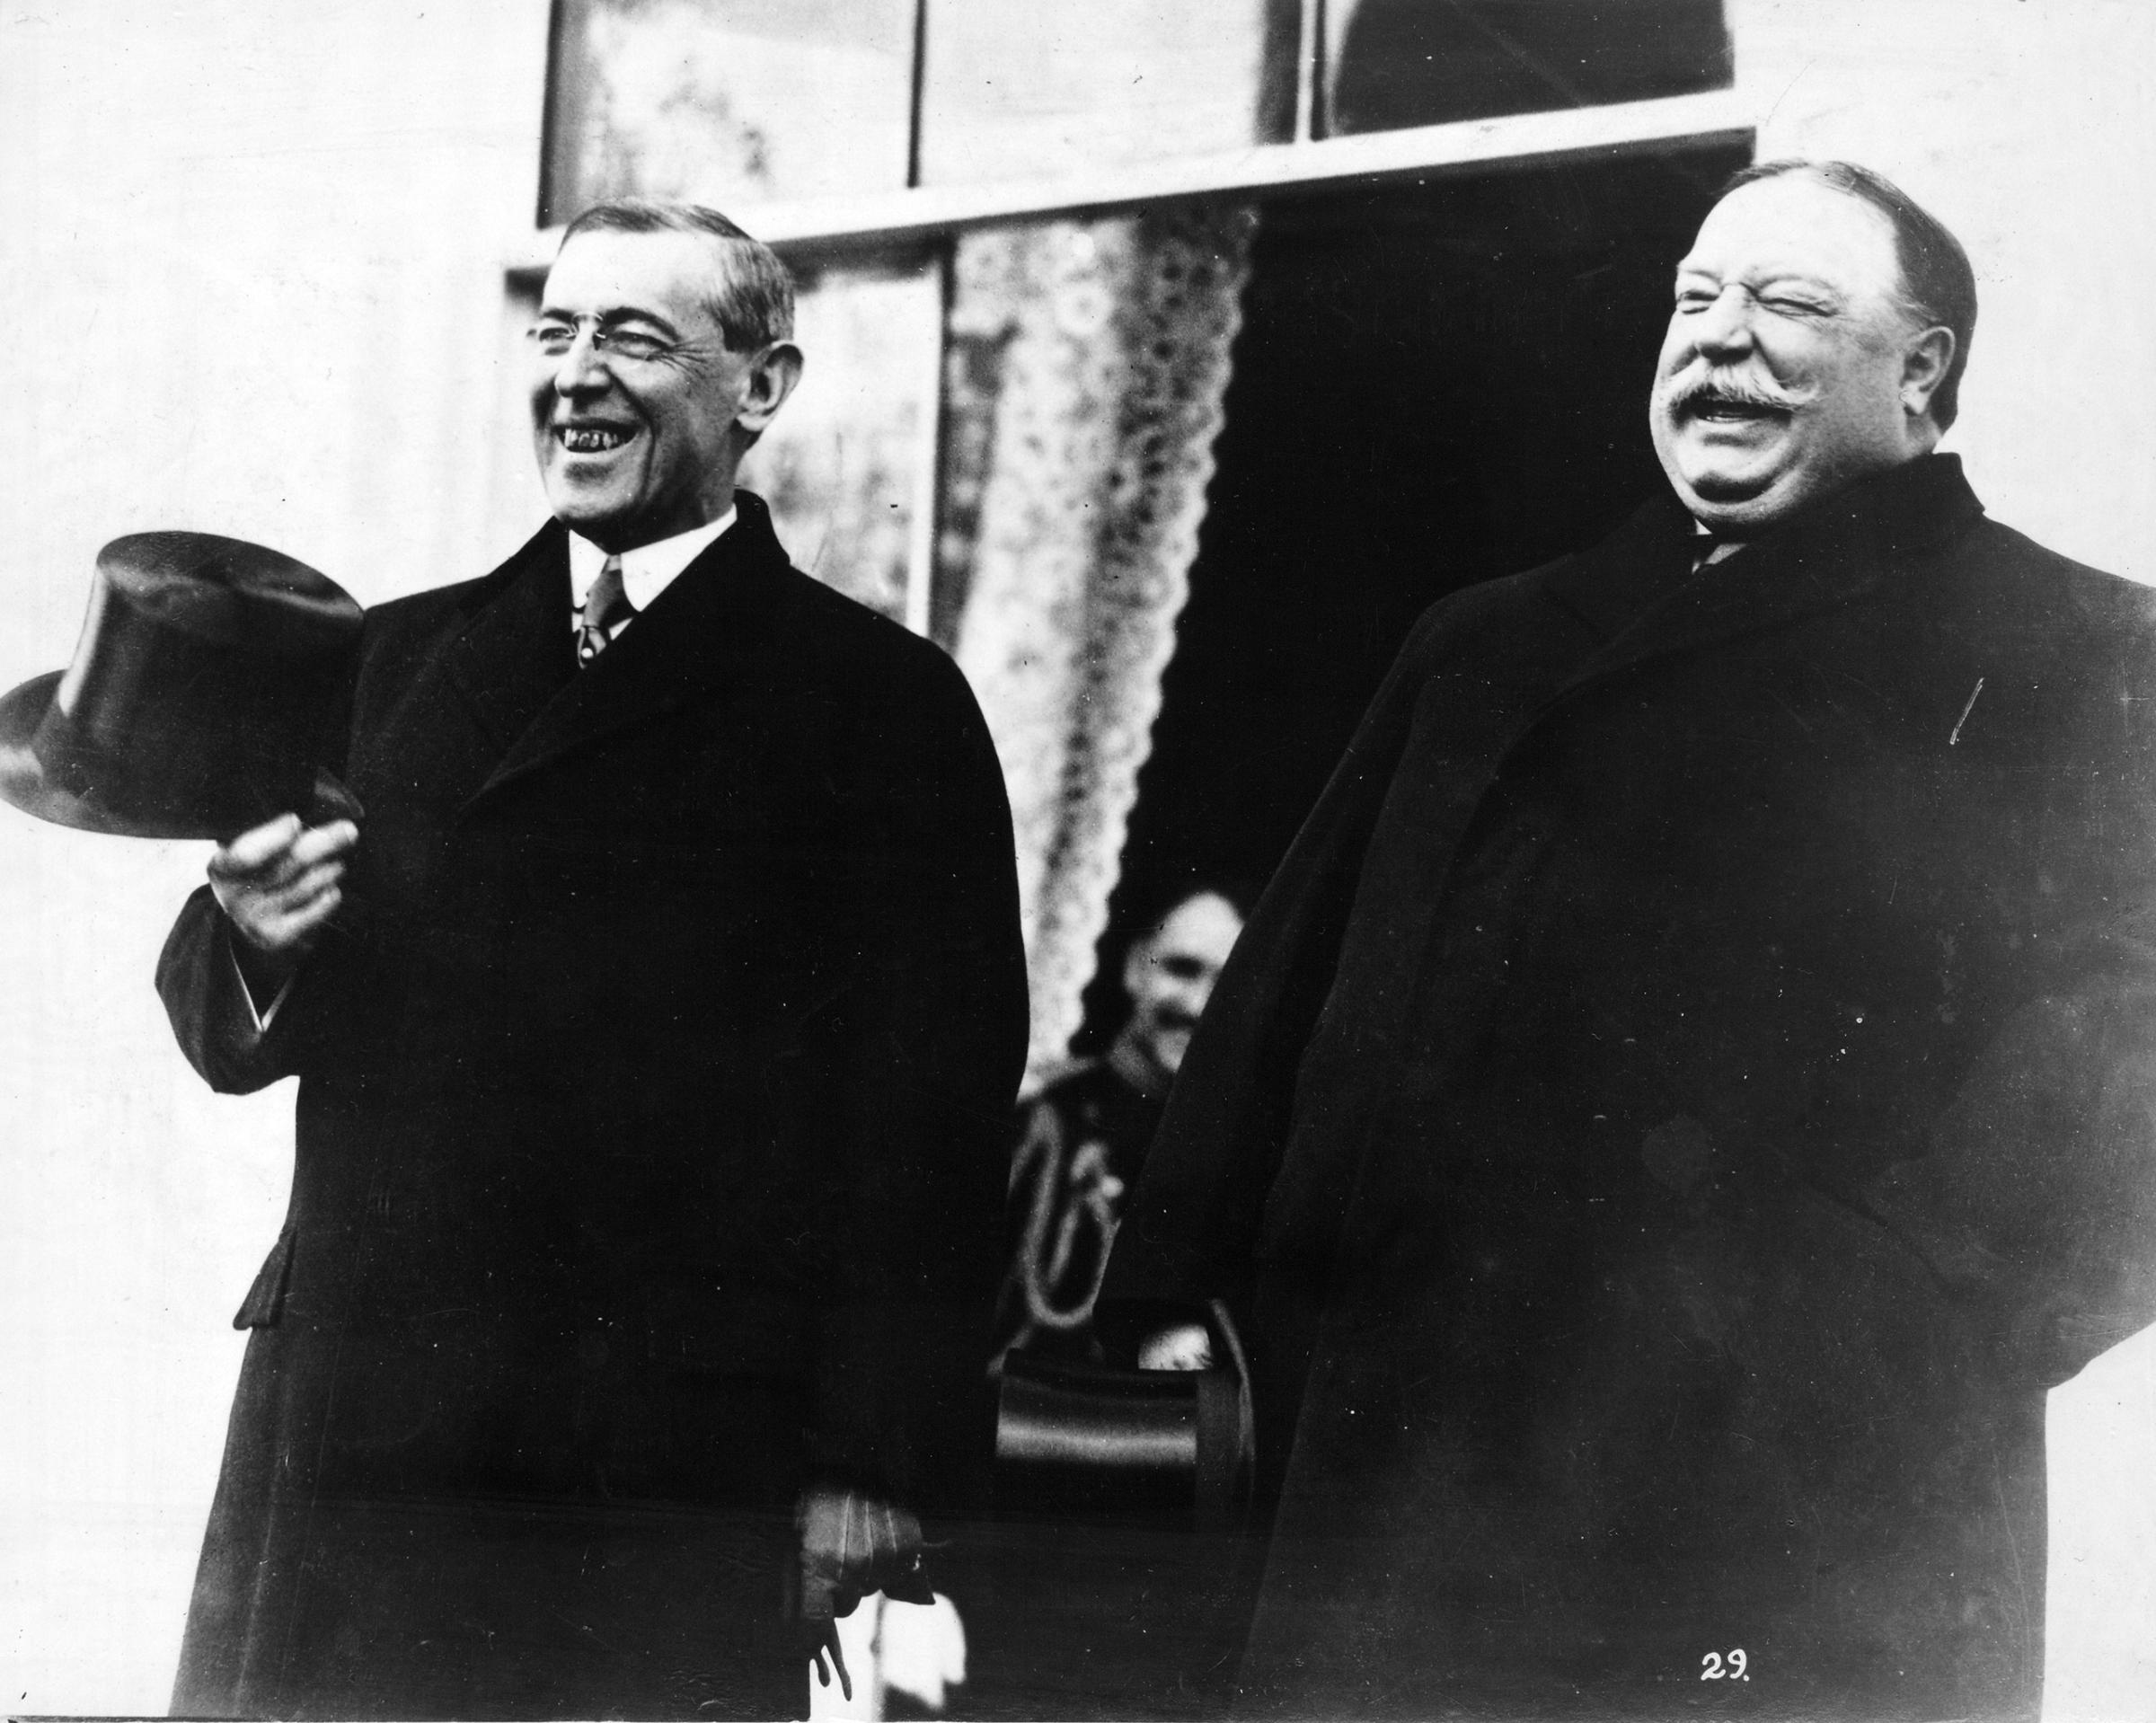 President-elect Woodrow Wilson and President Taft, standing side by side, laughing, at the White House, prior to Wilson's inauguration ceremonies, March 4, 1913.